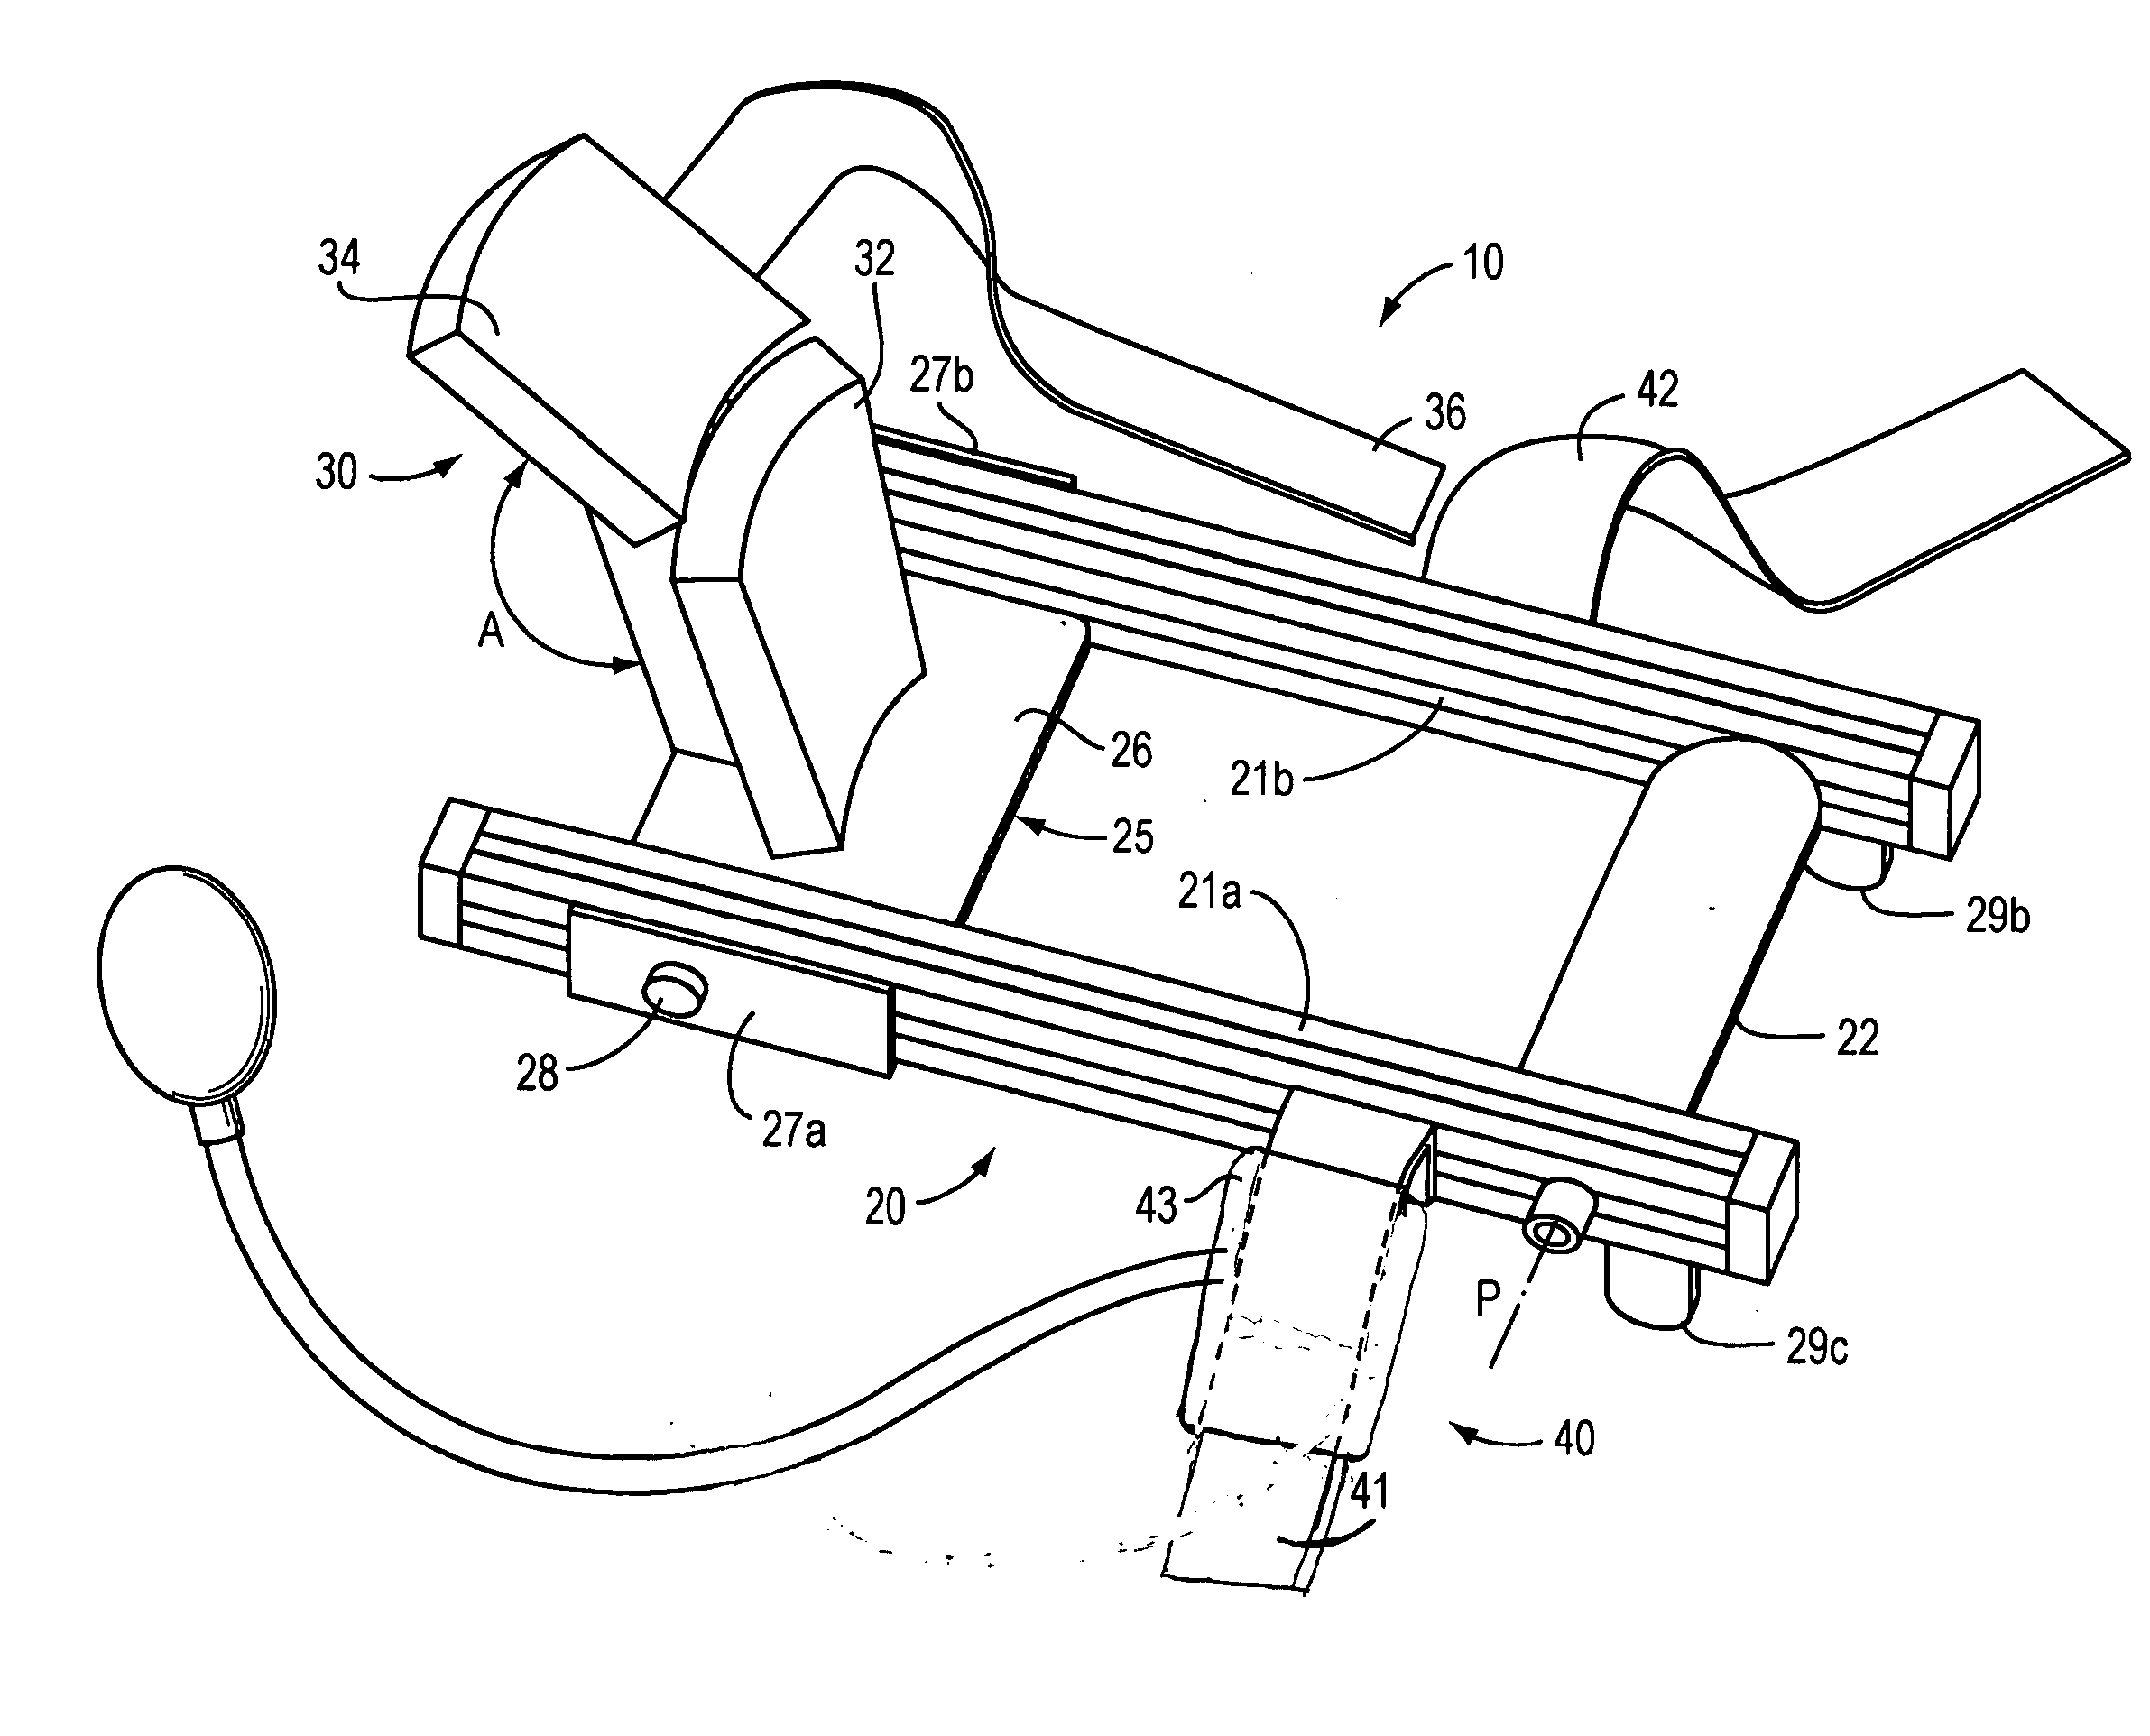 Method and apparatus for manipulating a toe joint